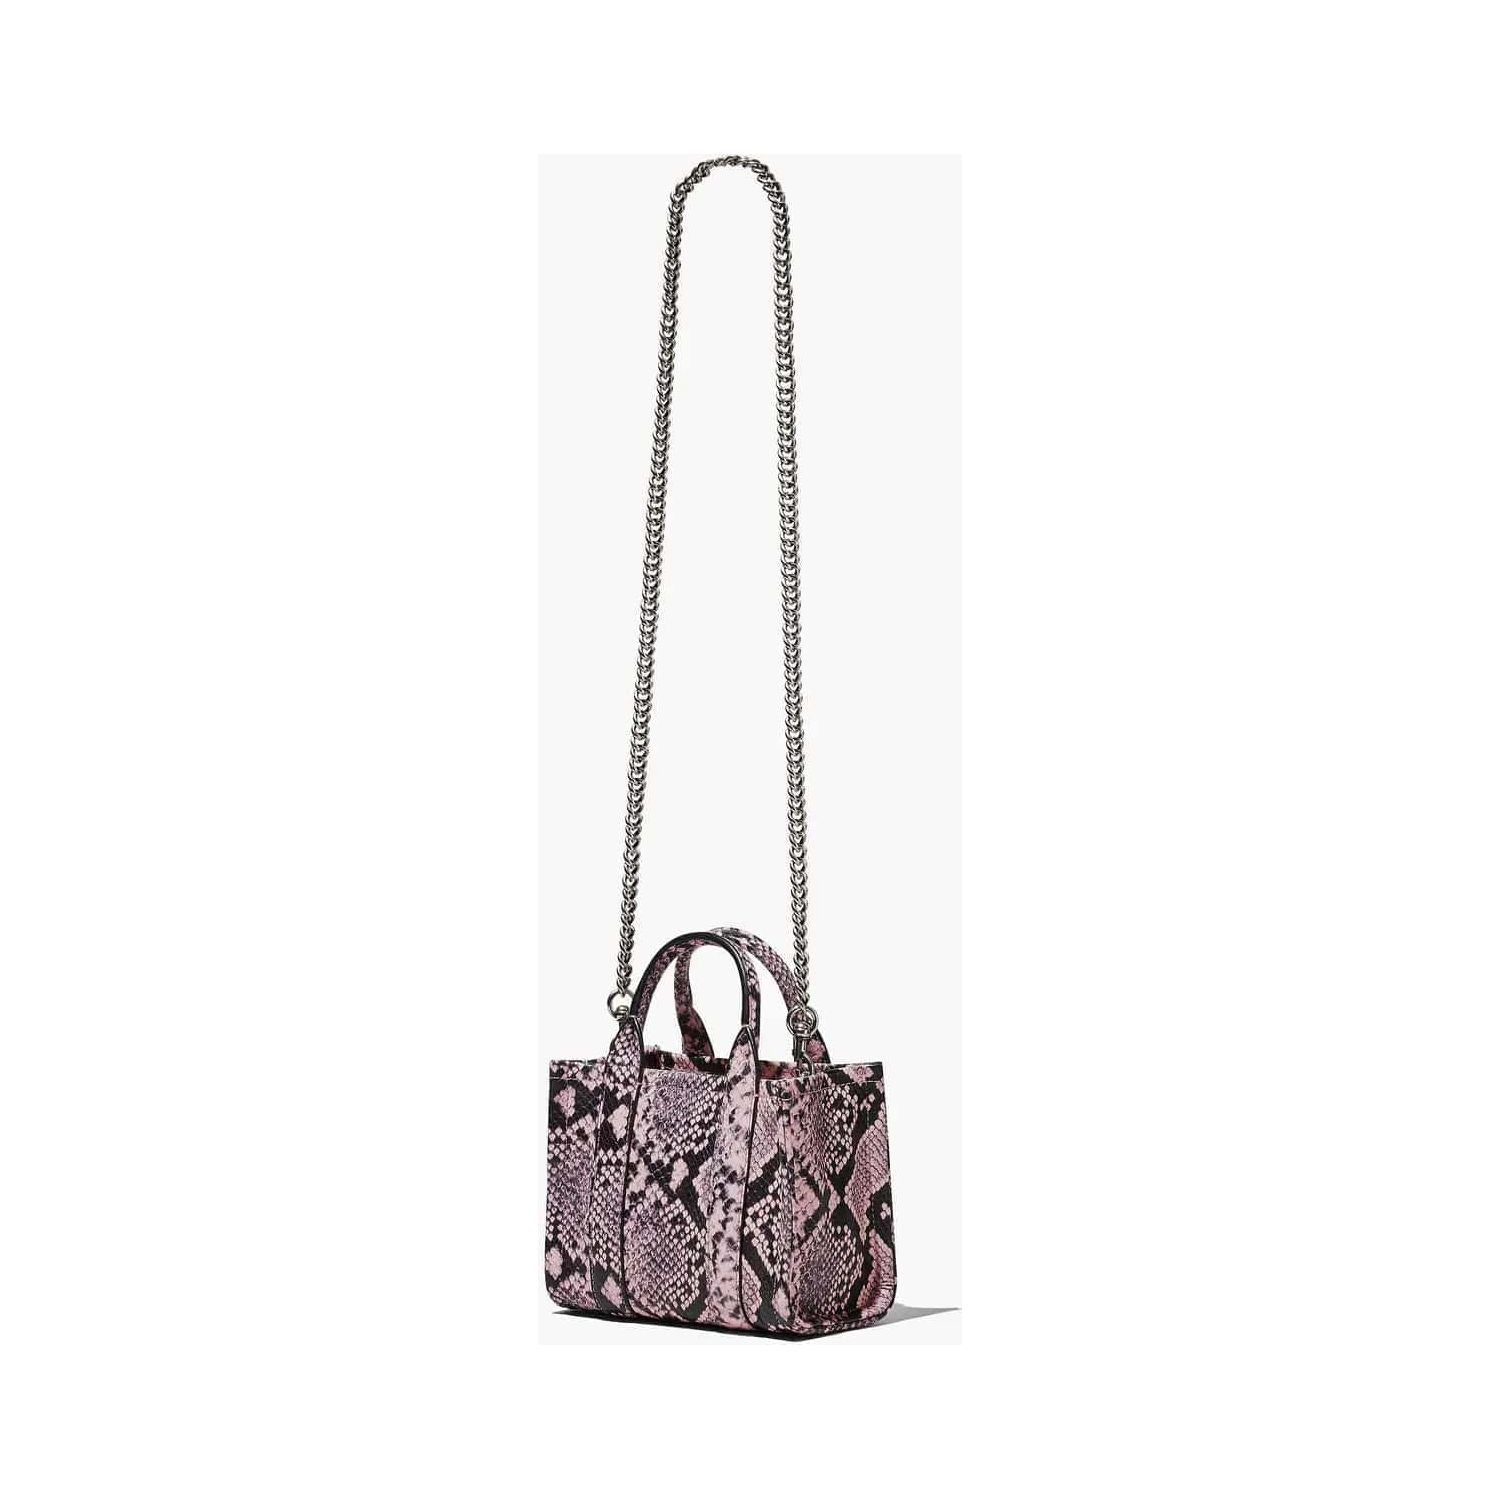 MARC JACOBS THE SNAKE-EMBOSSED MICRO TOTE BAG - Yooto